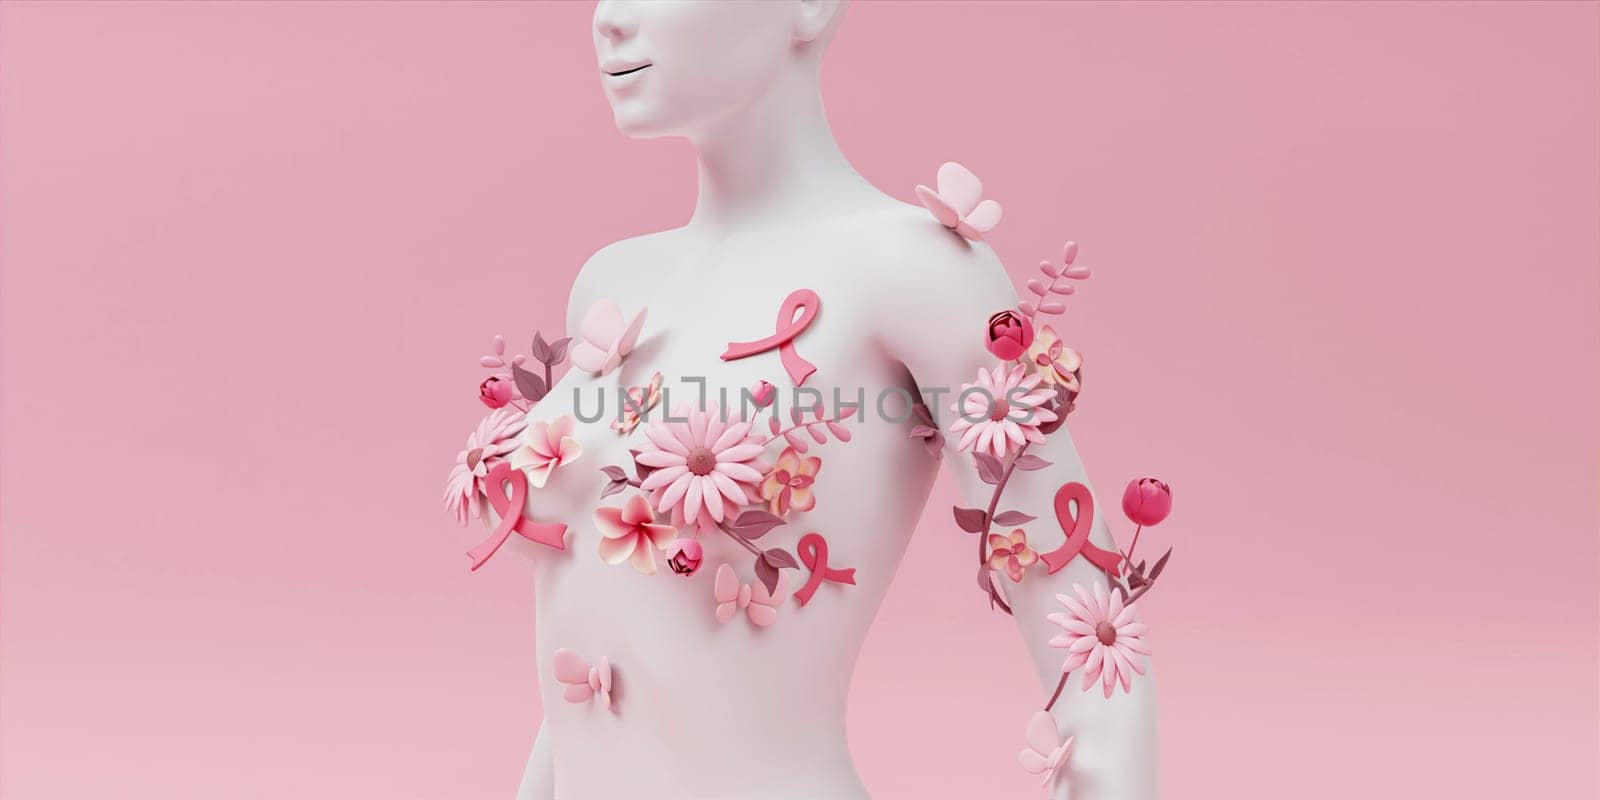 3d render, female bust, white mannequin covered with colorful paper flowers, woman silhouette isolated on pink background. Breast cancer support. Floral fashion concept. Modern botanical sculpture.